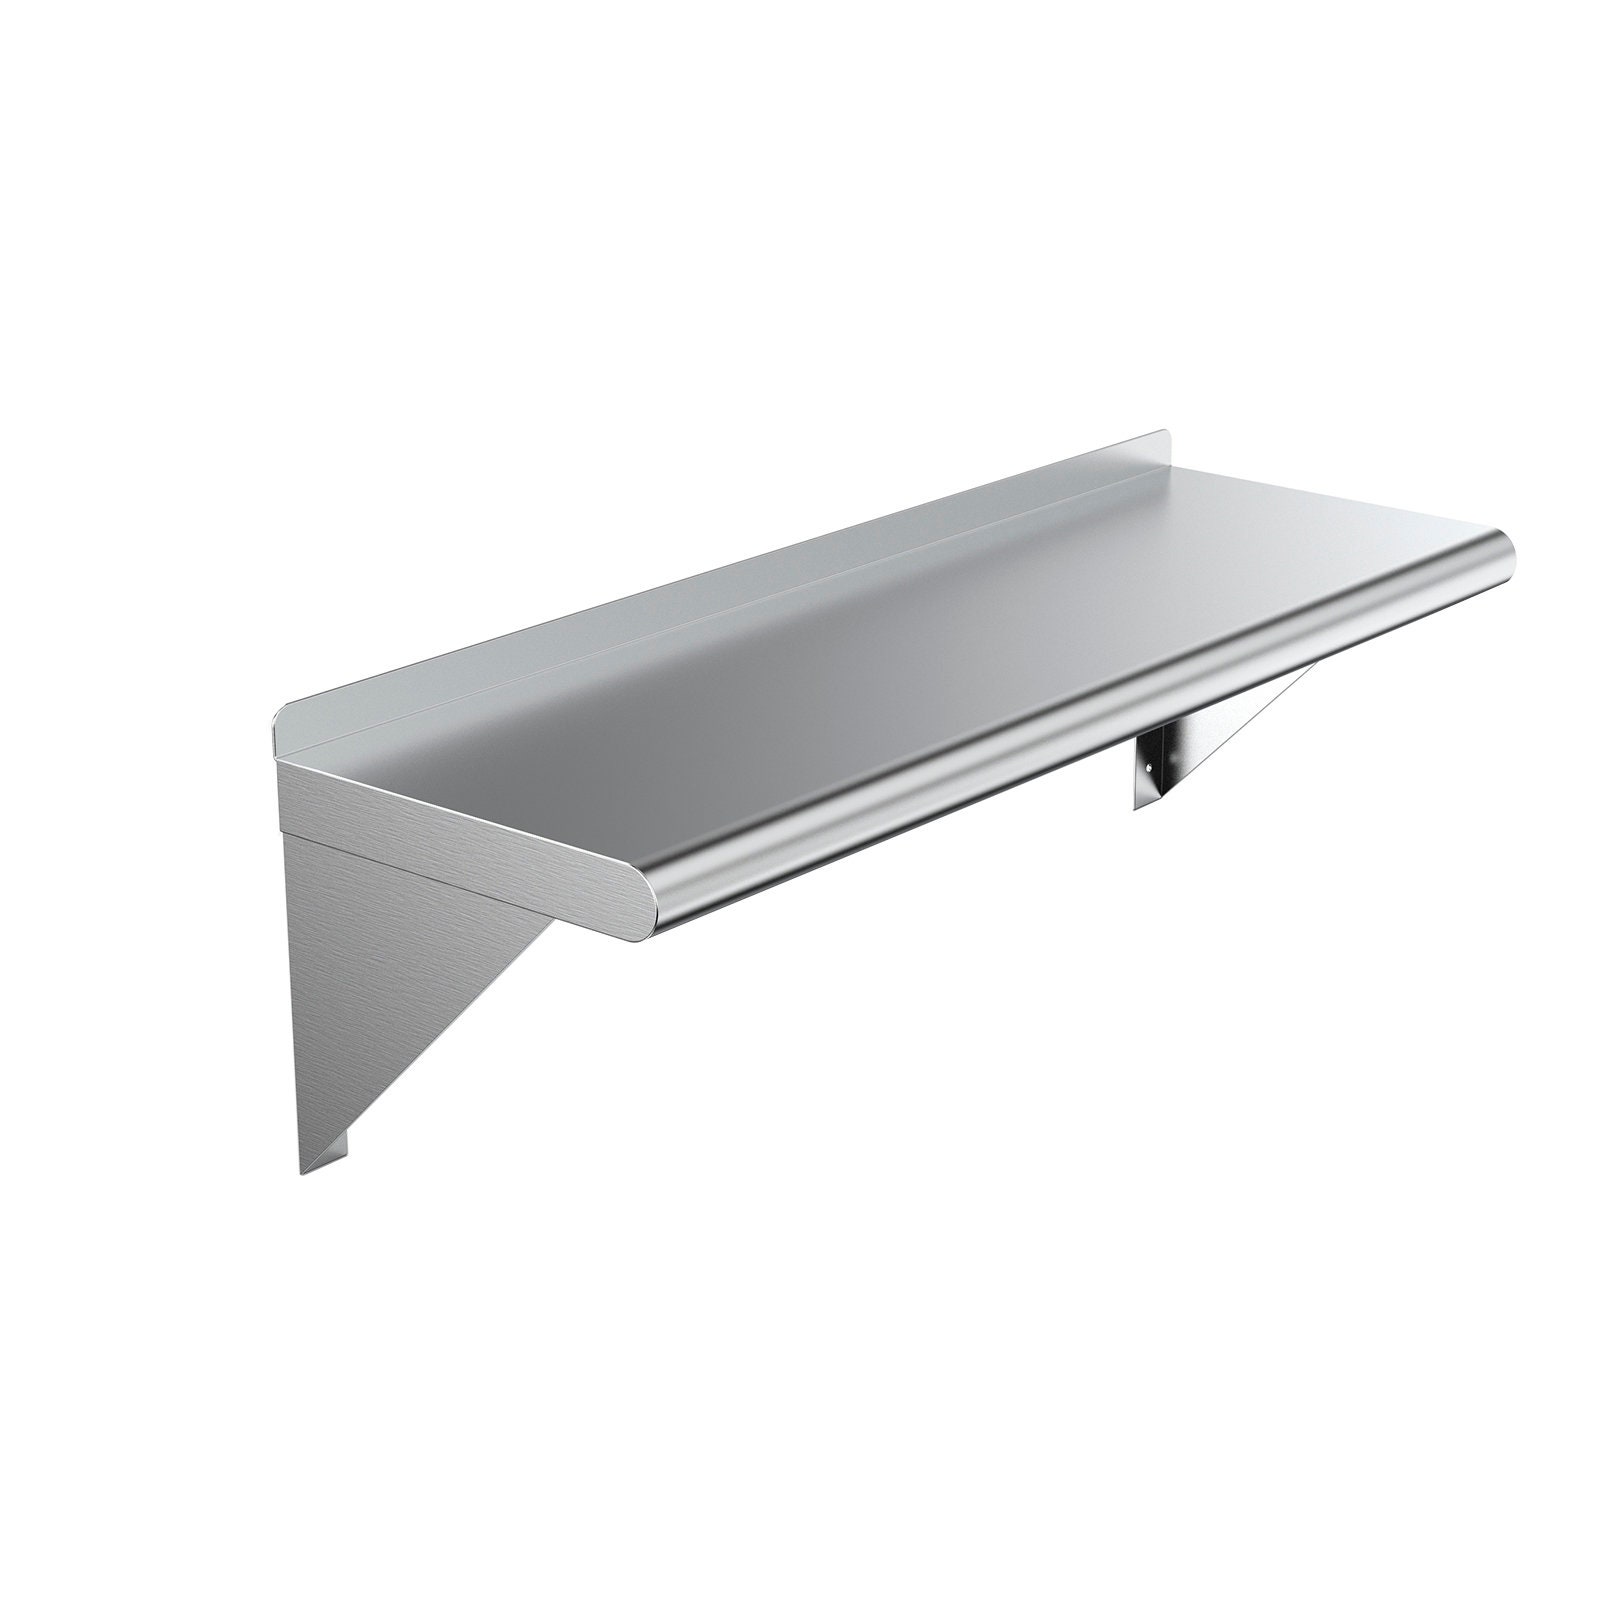 1200x350x40mm KingSaid Wall Mounted Stainless Steel Kitchen Shelf Catering Storage Shelves Bathroom Shower Shelf Corrosion Resistant 